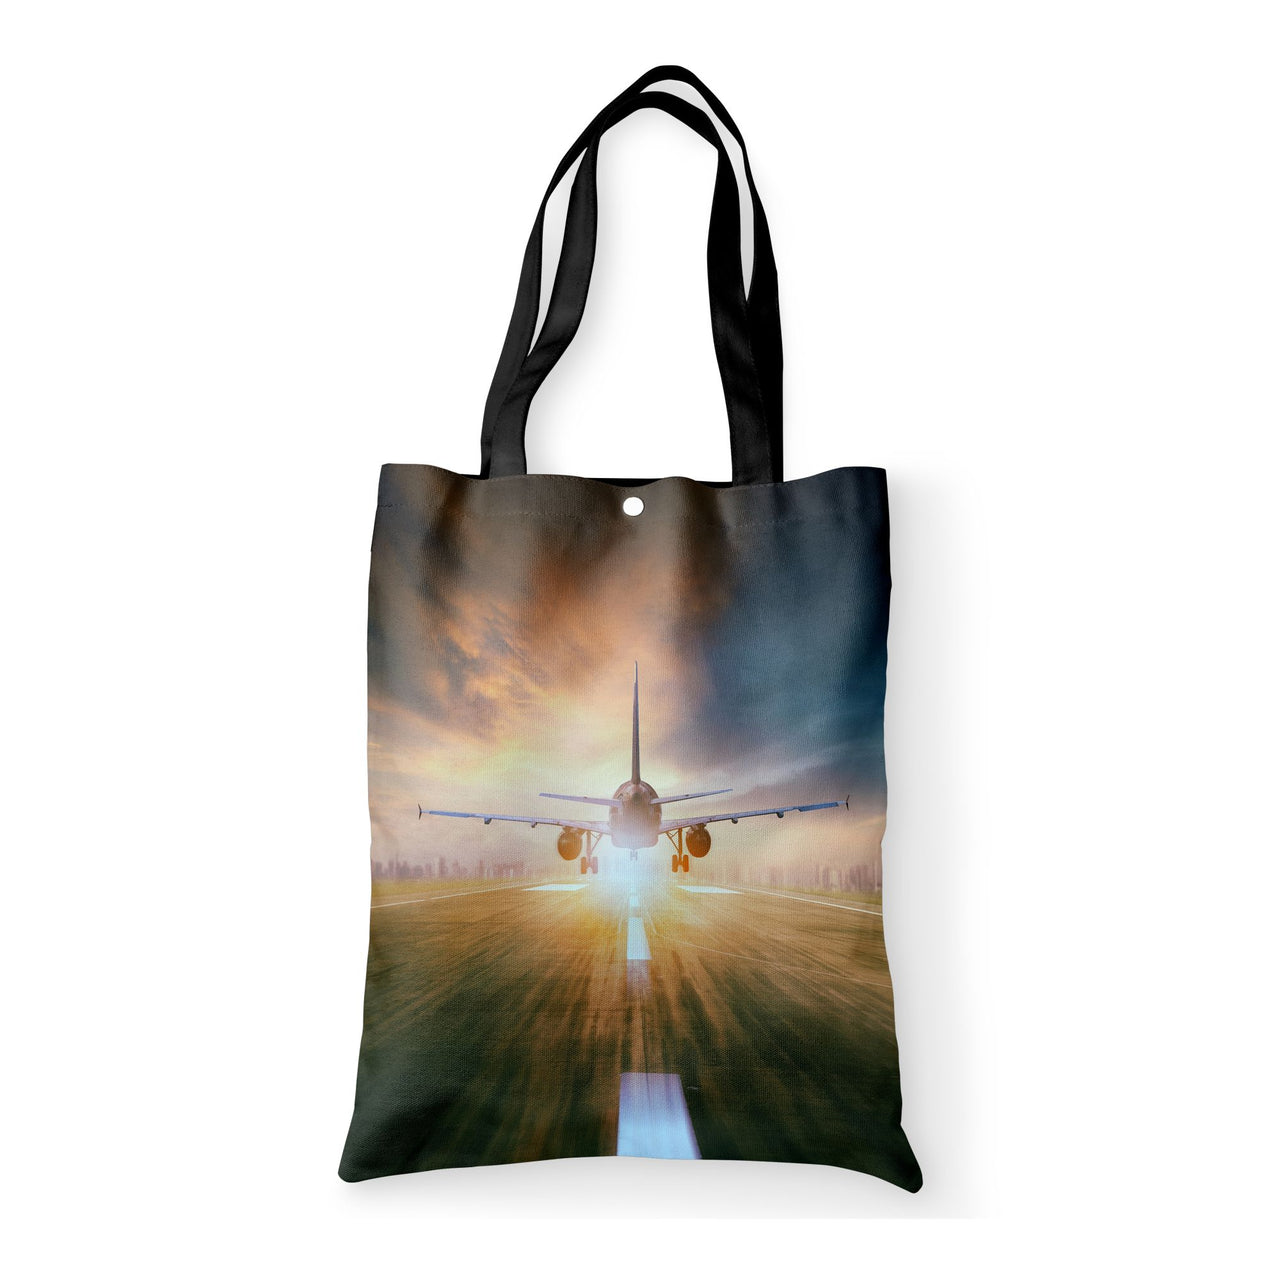 Airplane Flying Over Runway Designed Tote Bags